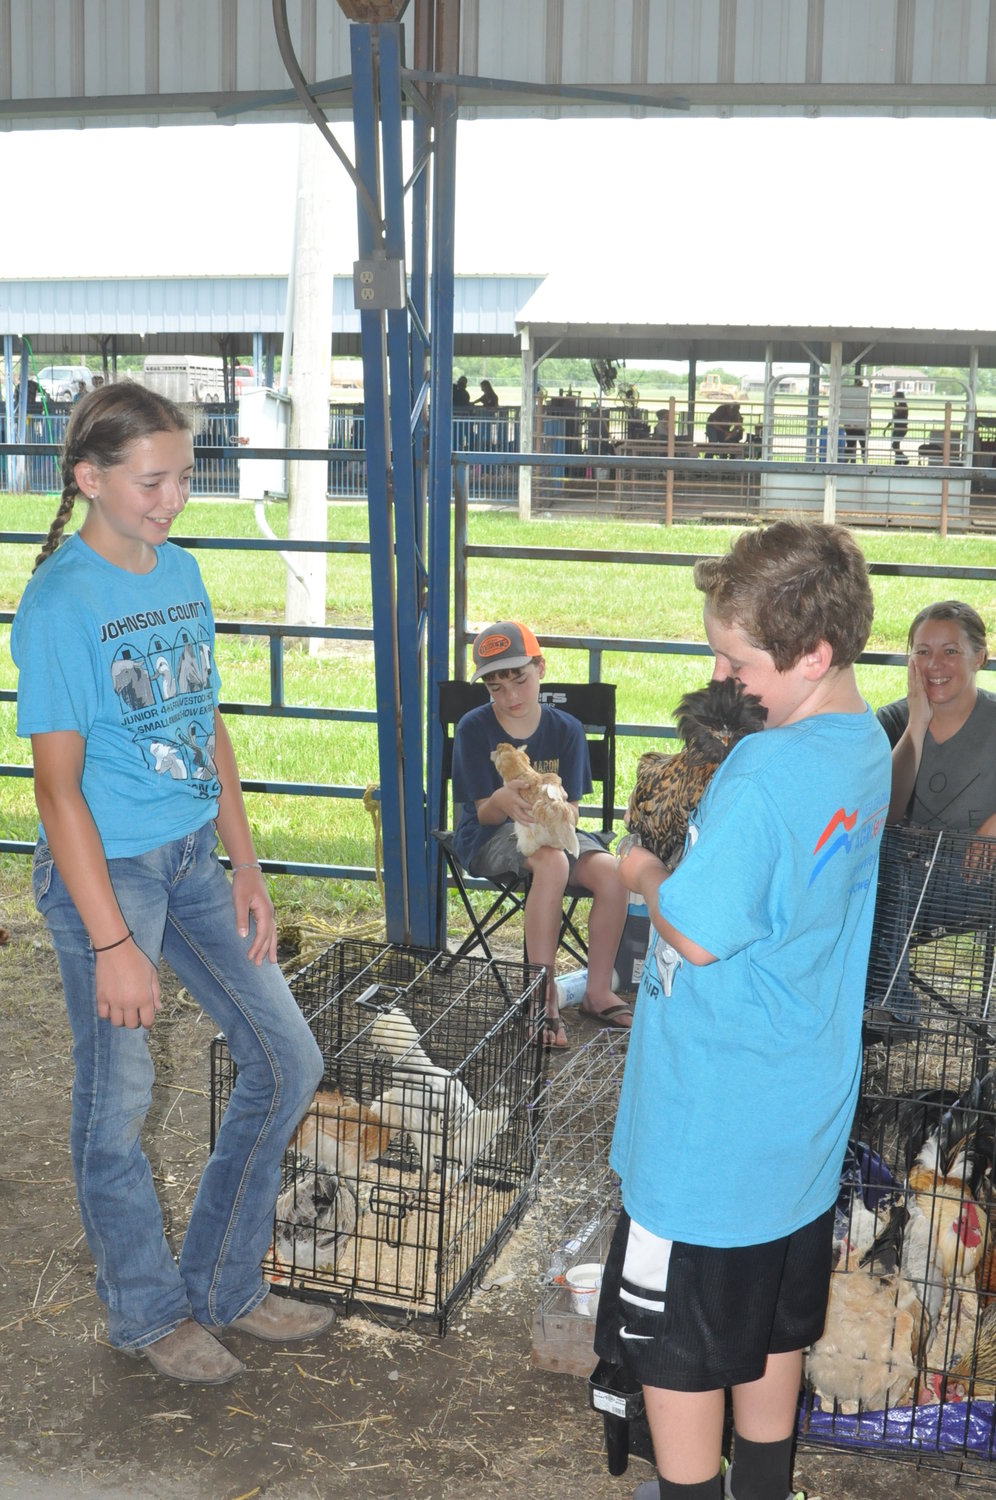 Grayci Holcomb of the Blackwater Bobcats 4-H Club lets Gaige Zwally of the Mt. Moriah Hustlers 4-H Club hold one of her chickens prior to the Poultry Show.